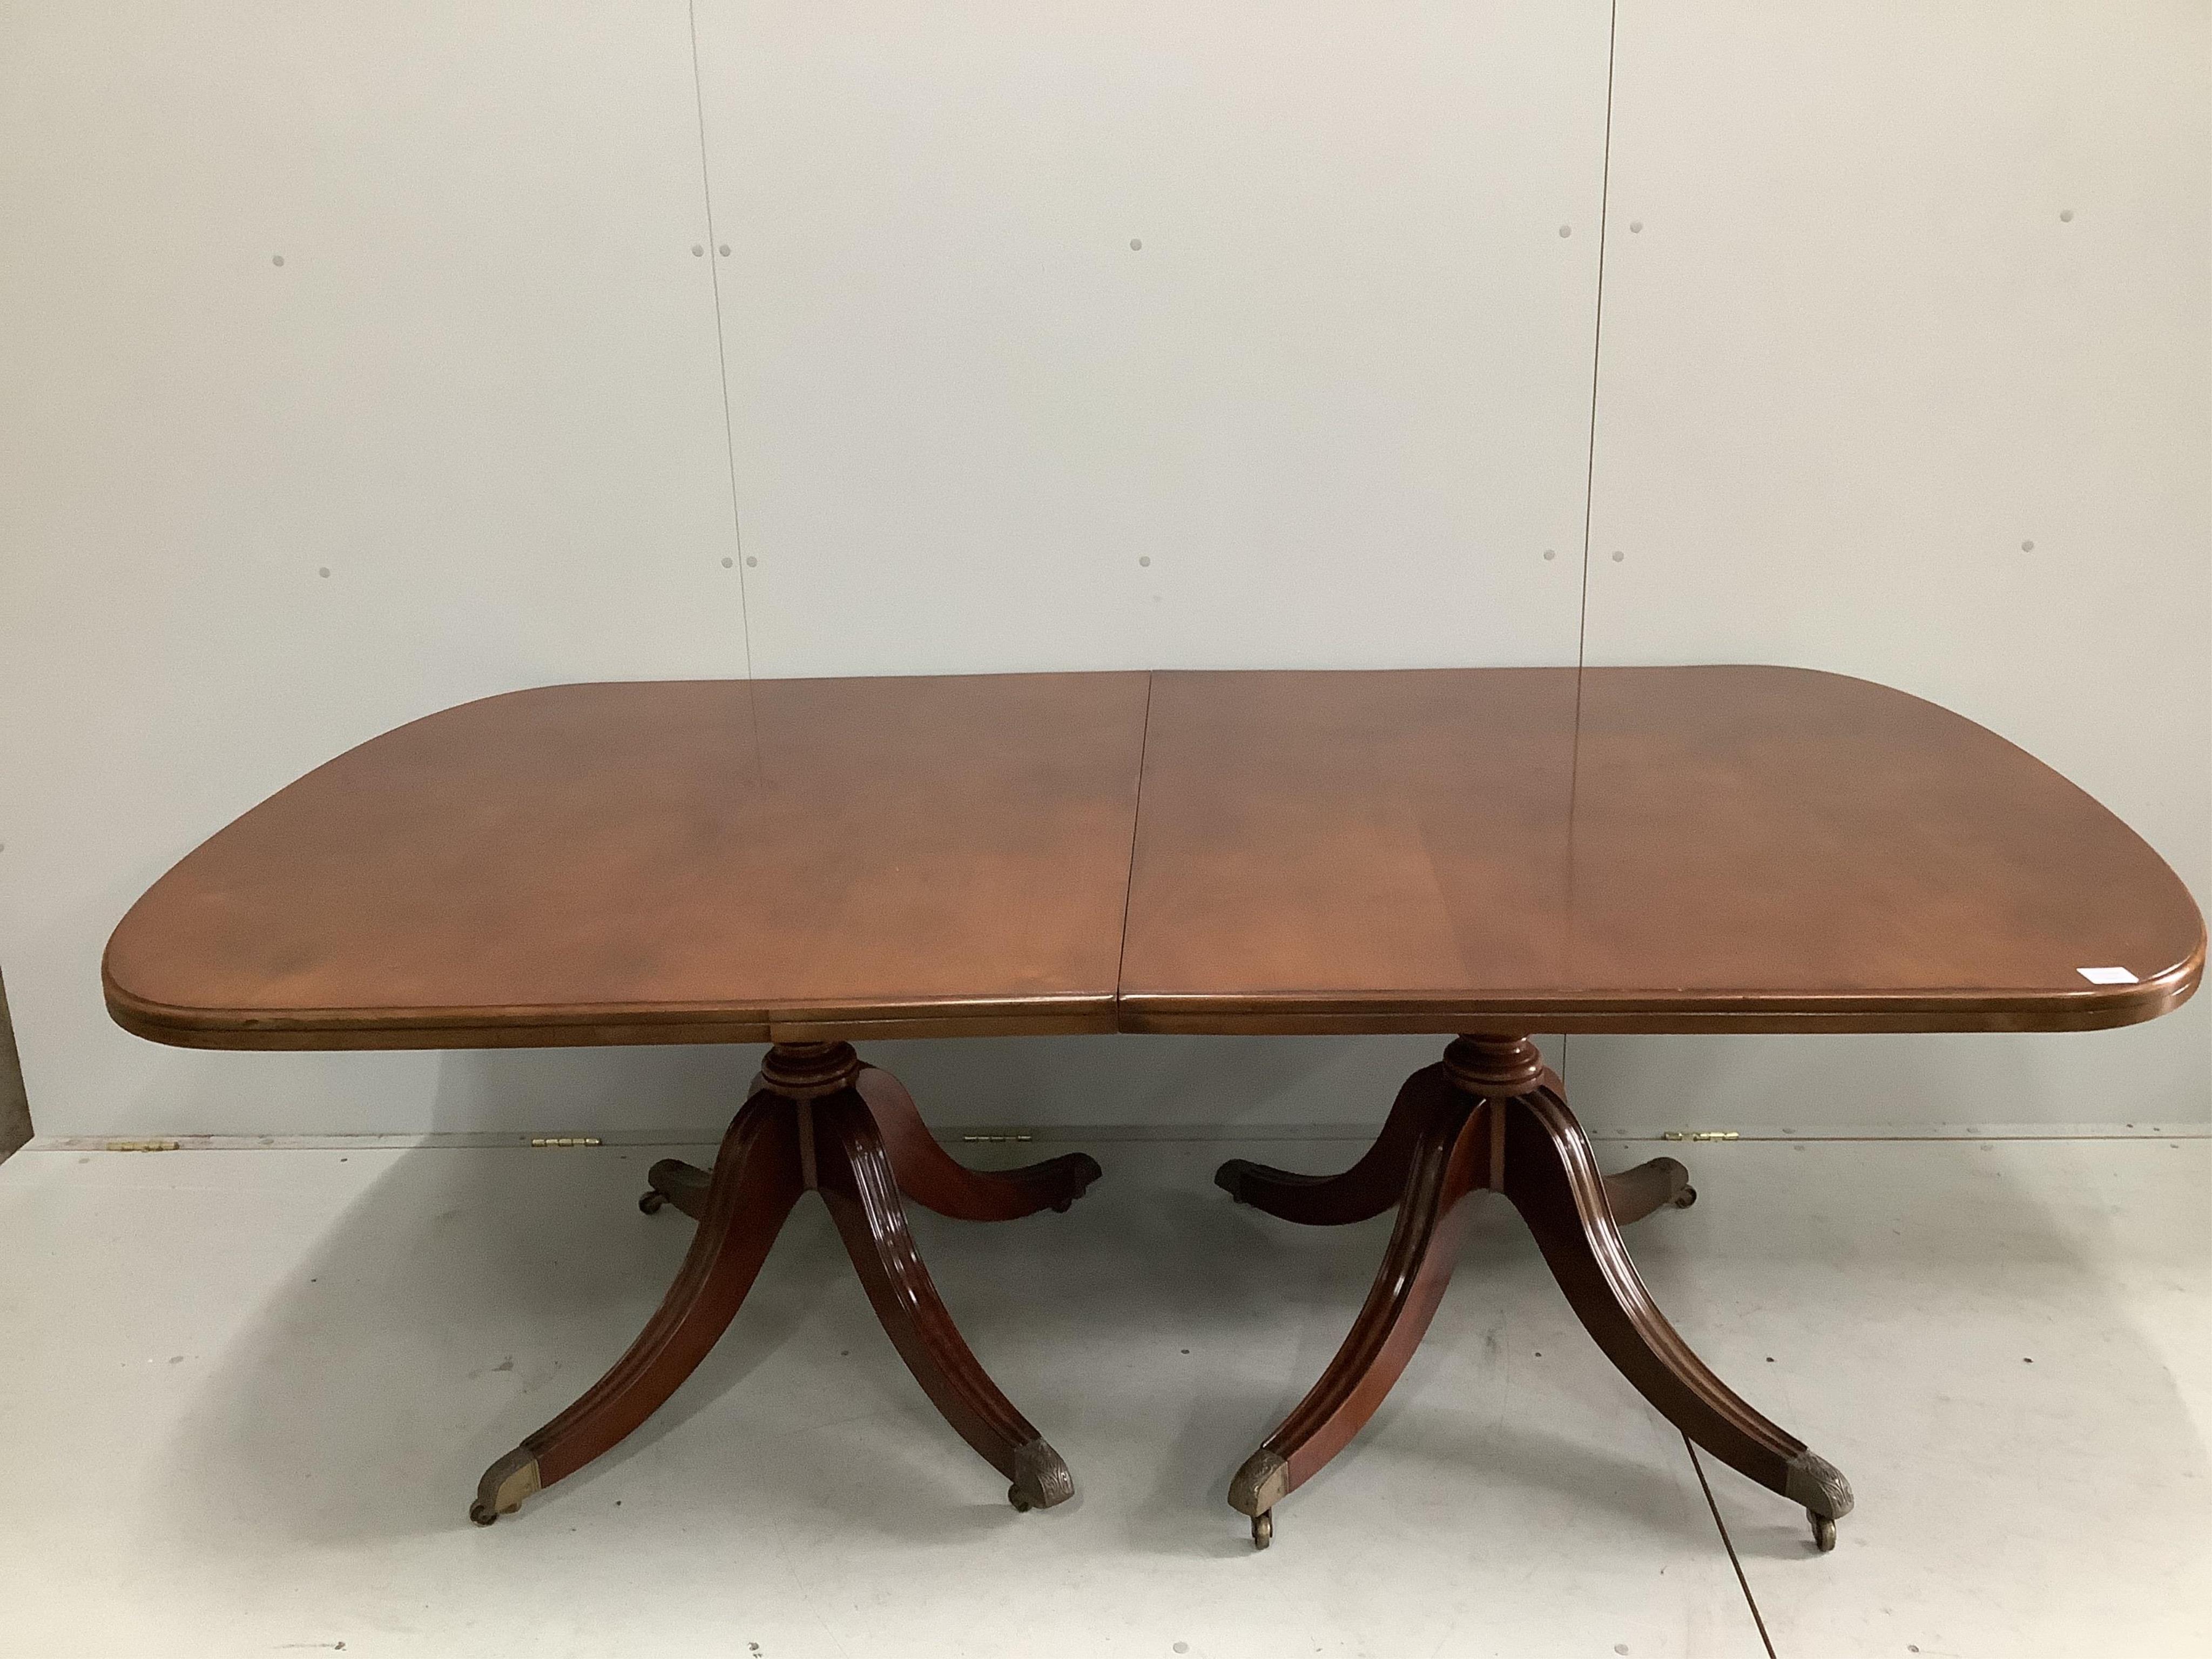 A reproduction George III style mahogany twin pillar extending dining table, 264cm extended, one spare leaf, width 121cm, height 73cm. Condition - good